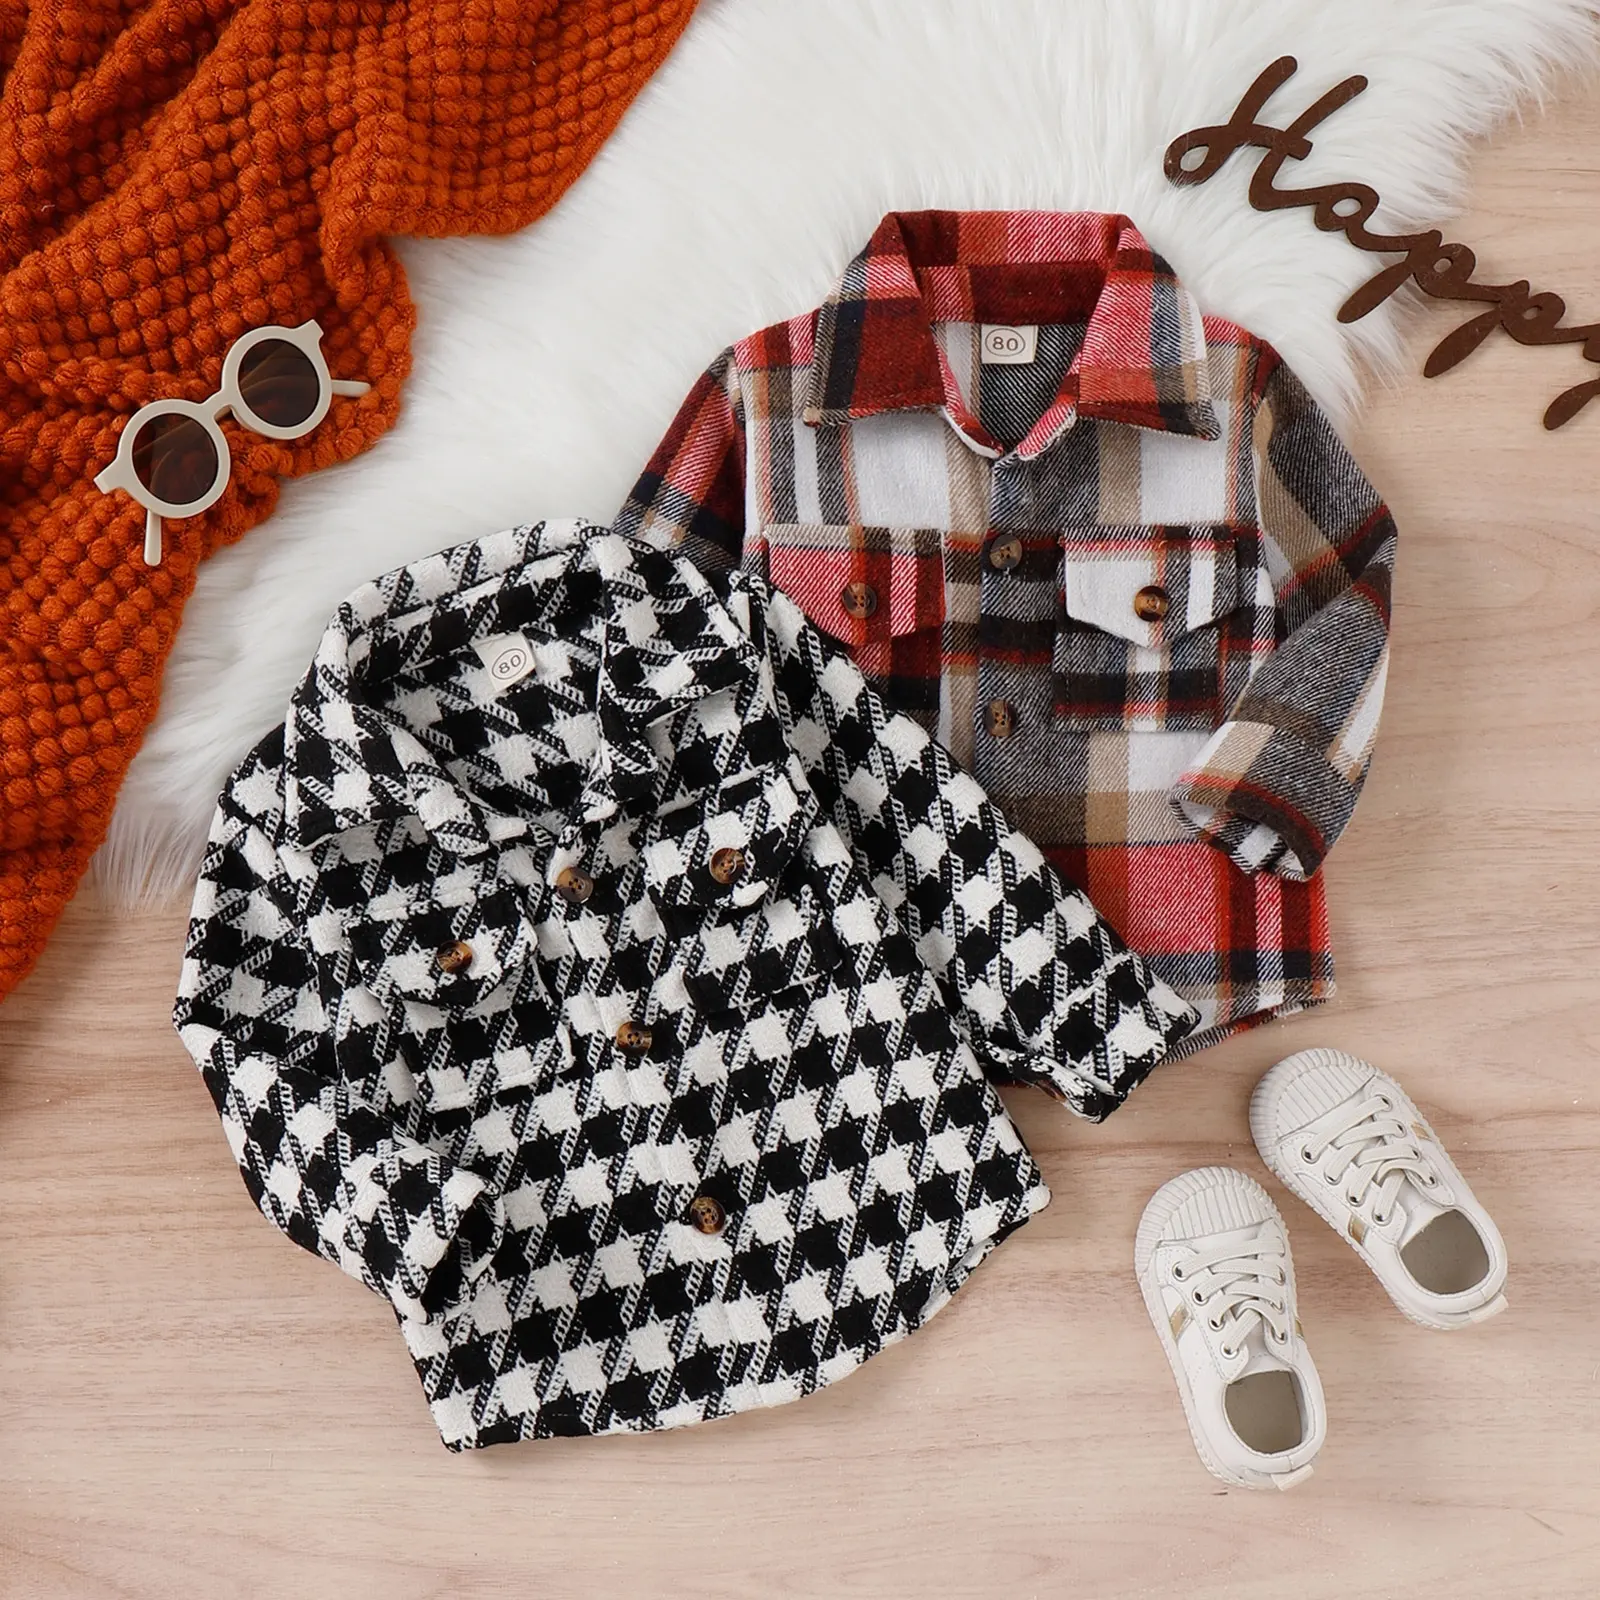 0-4Y Autumn Winter Kids Girls Jackets Fashion Style Plaid Printed Long Sleeve Single Breasted Coats Outwear